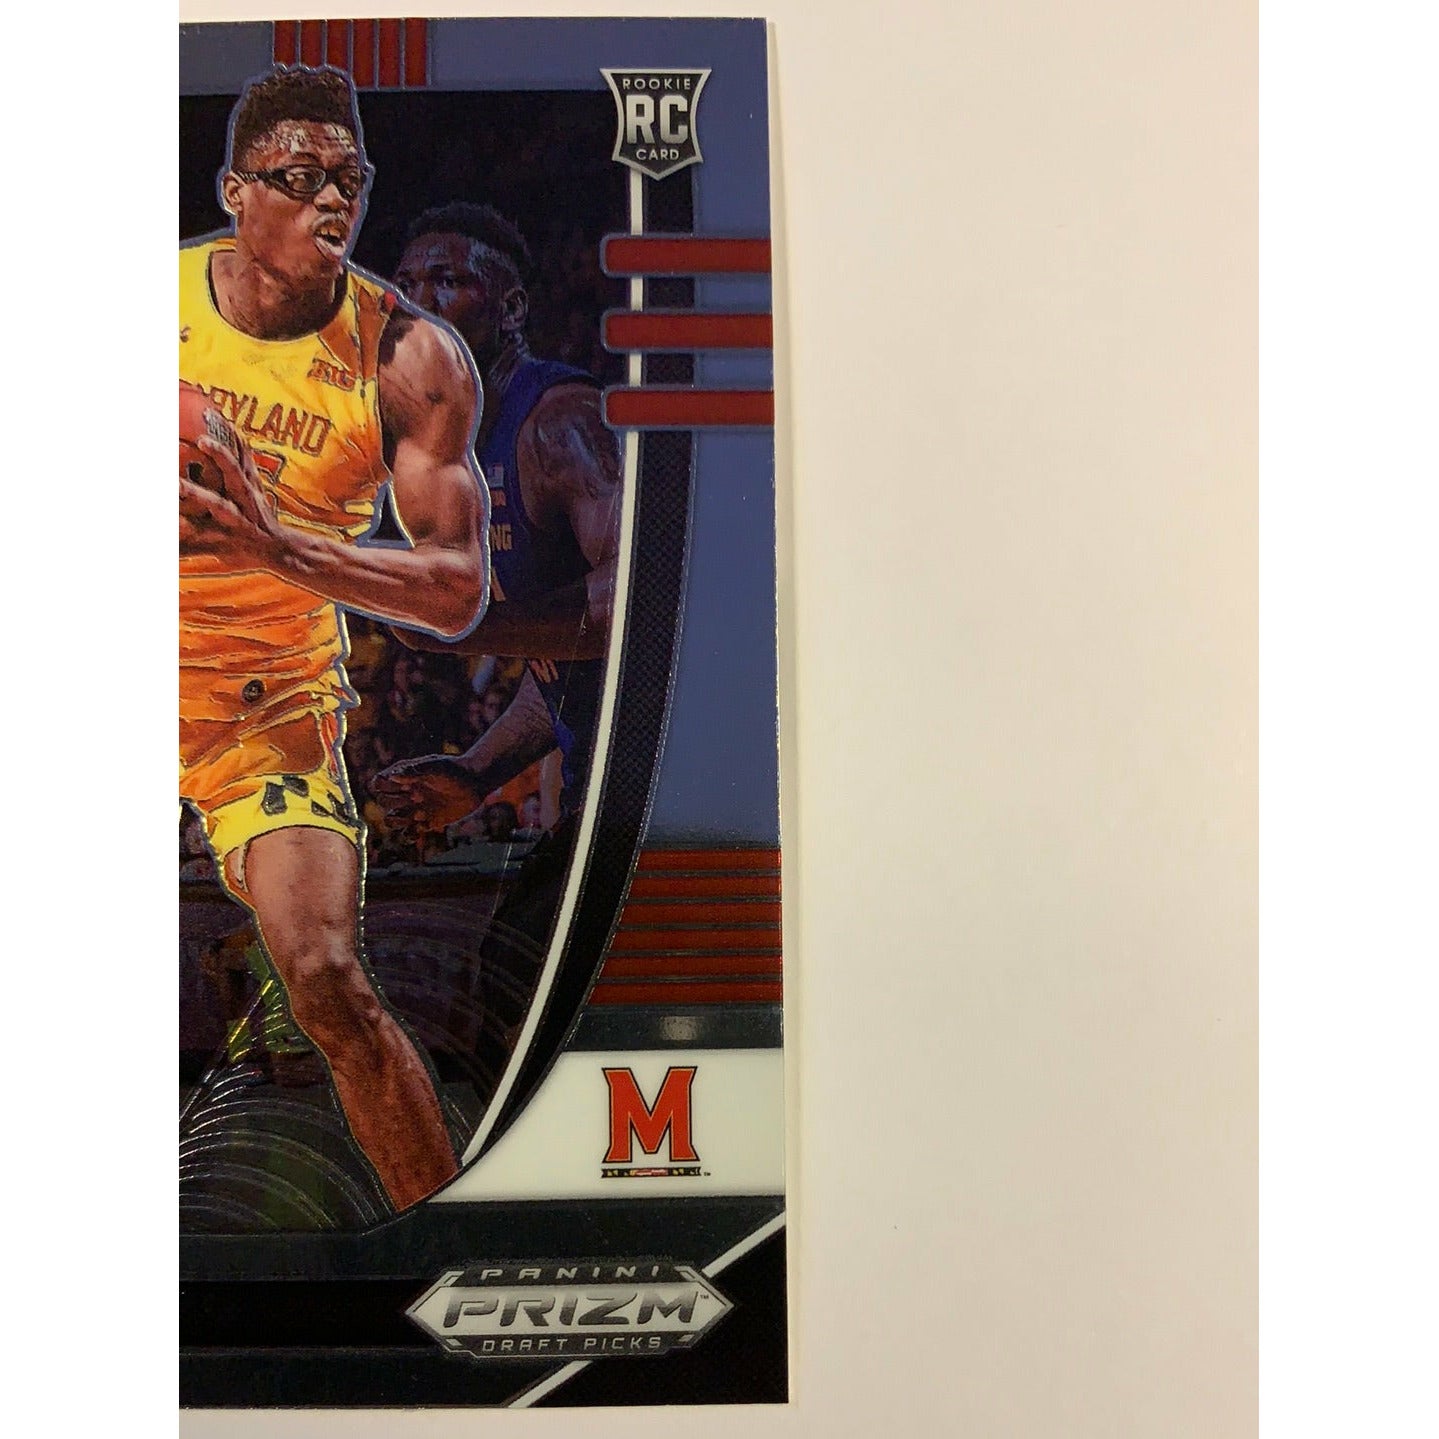  2020-21 Prizm Draft Picks Jalen Smith RC  Local Legends Cards & Collectibles